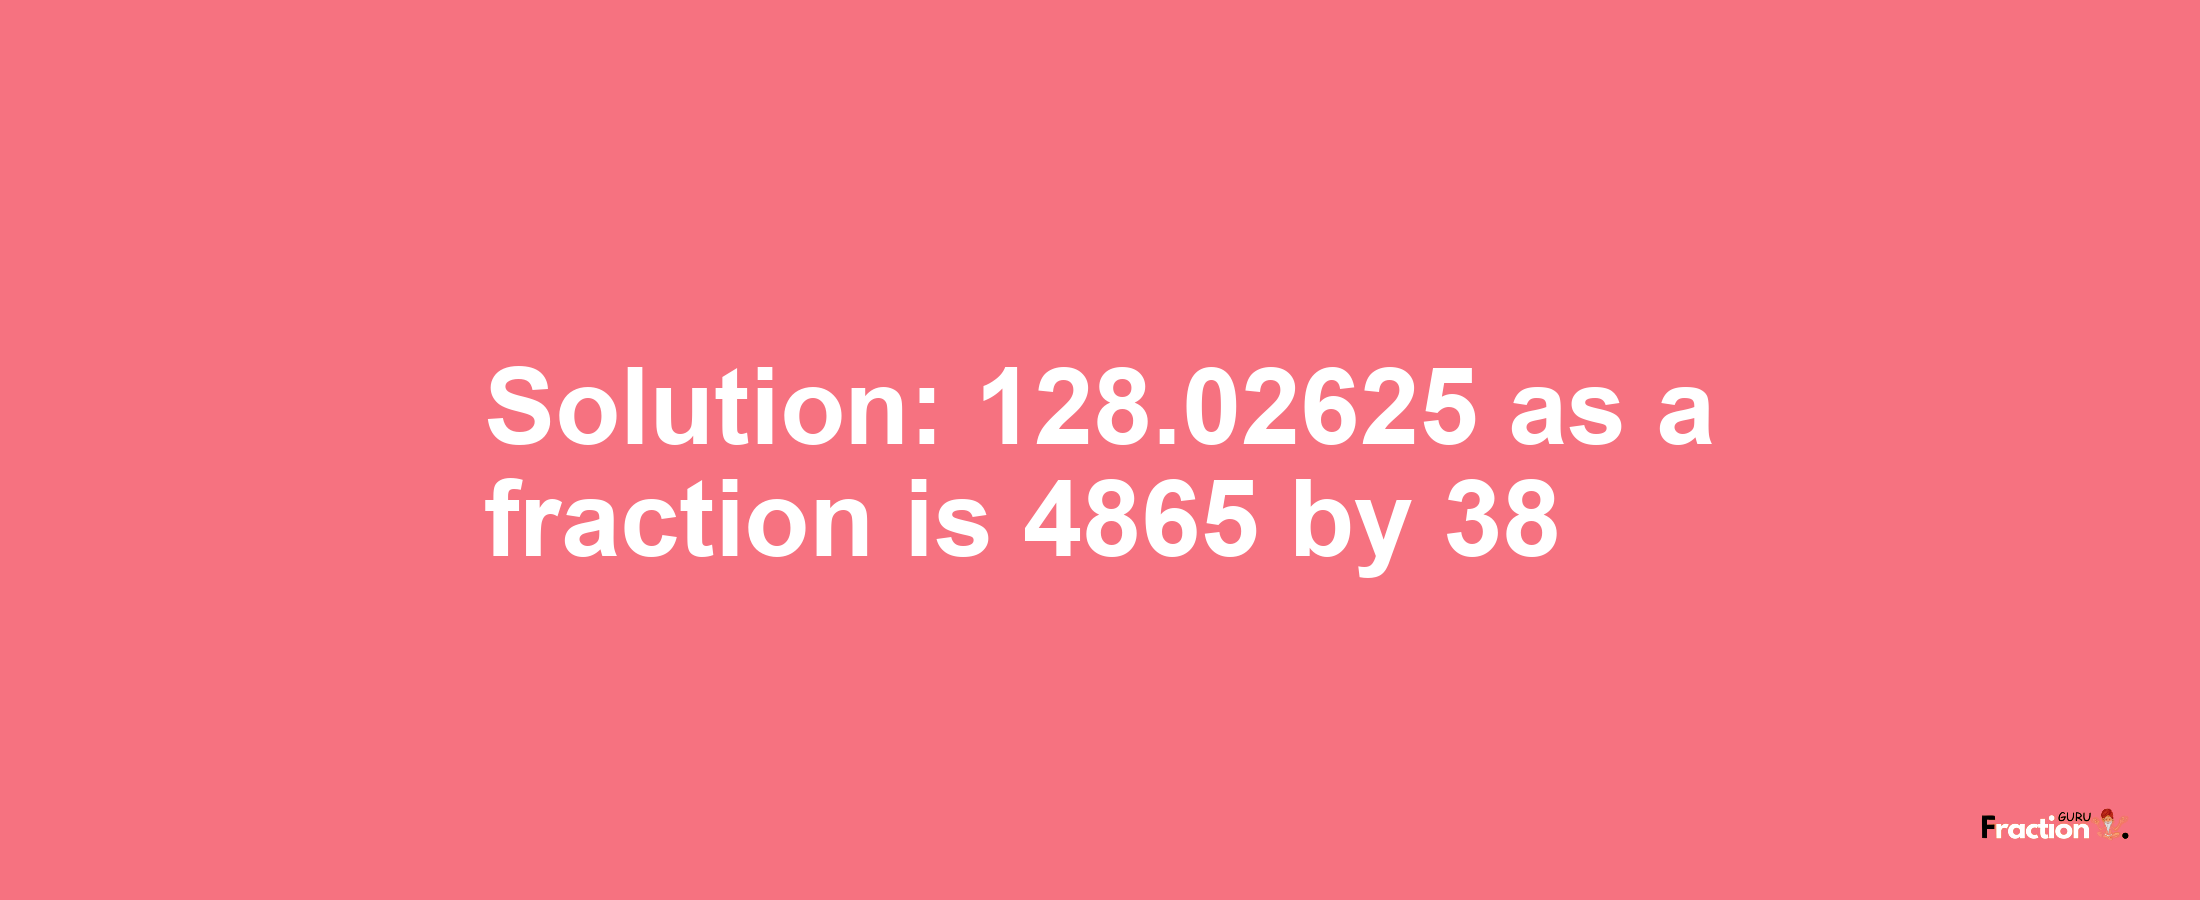 Solution:128.02625 as a fraction is 4865/38